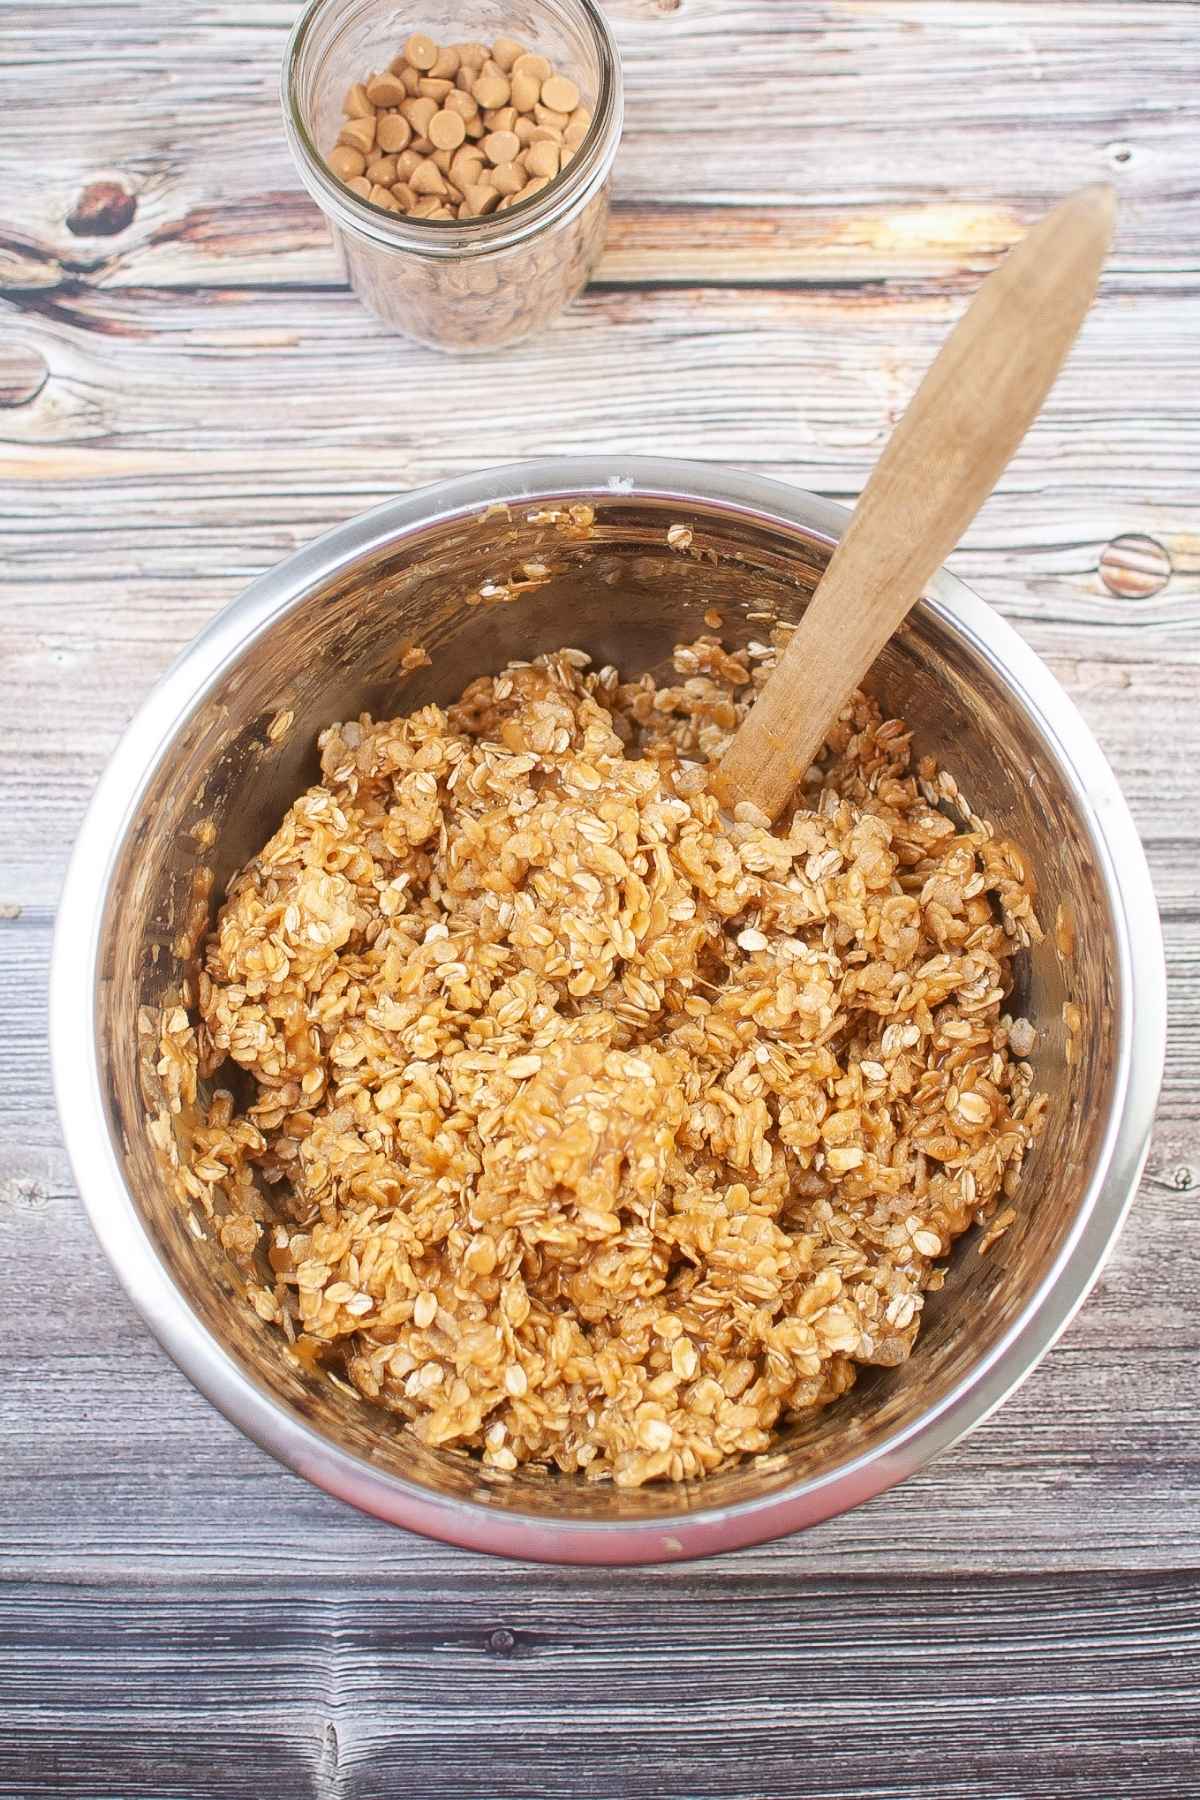 Peanut butter and oat mixture.